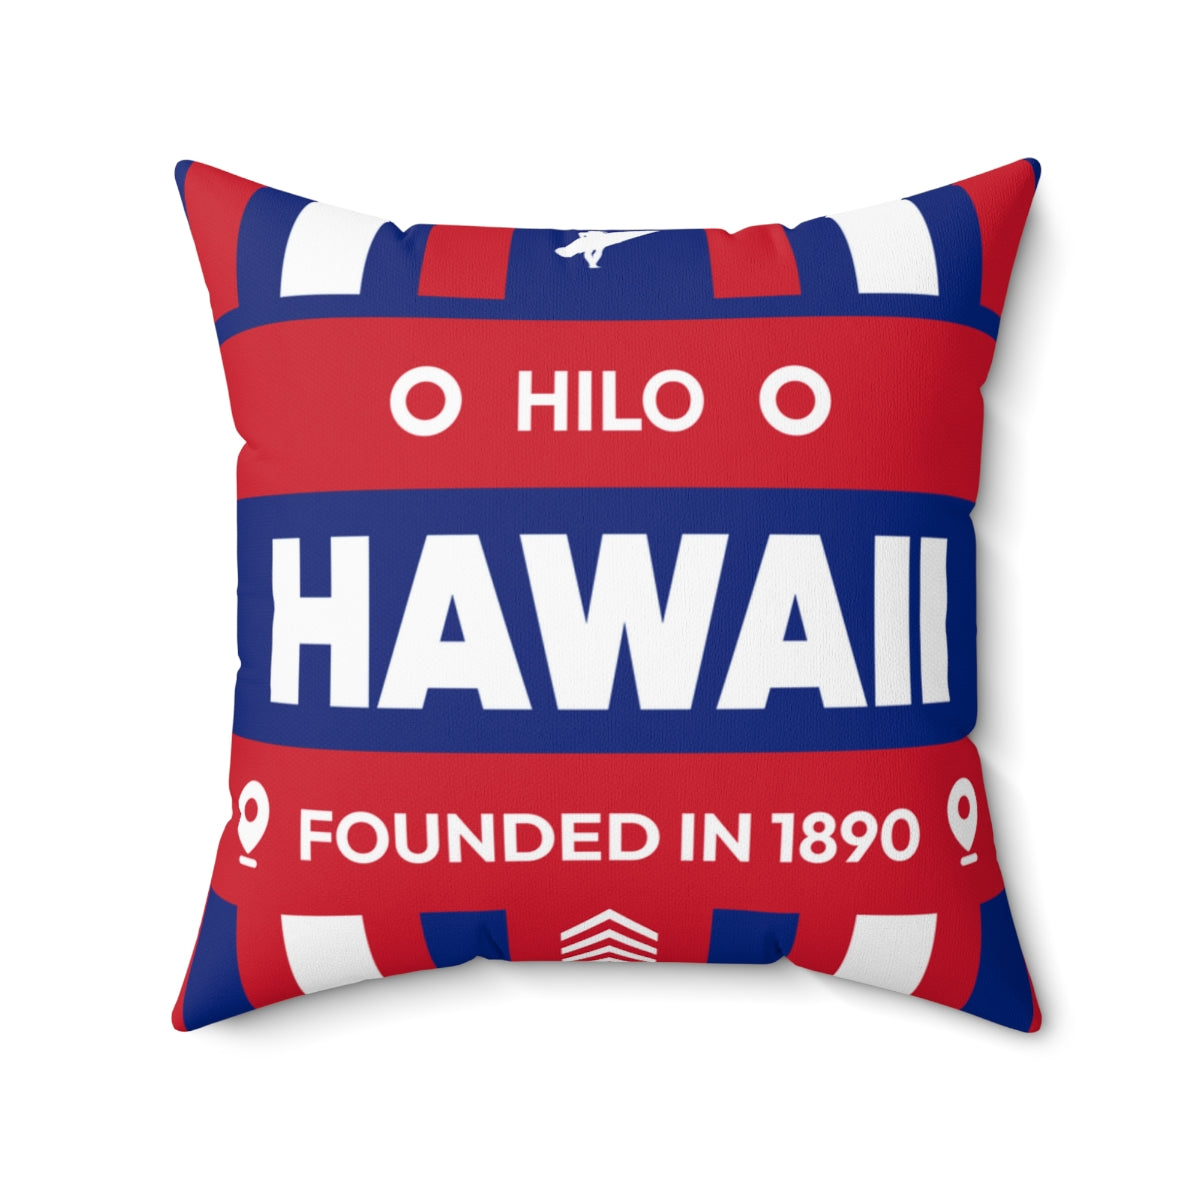 20"x20" pillow design for Hilo, Hawaii Top view.